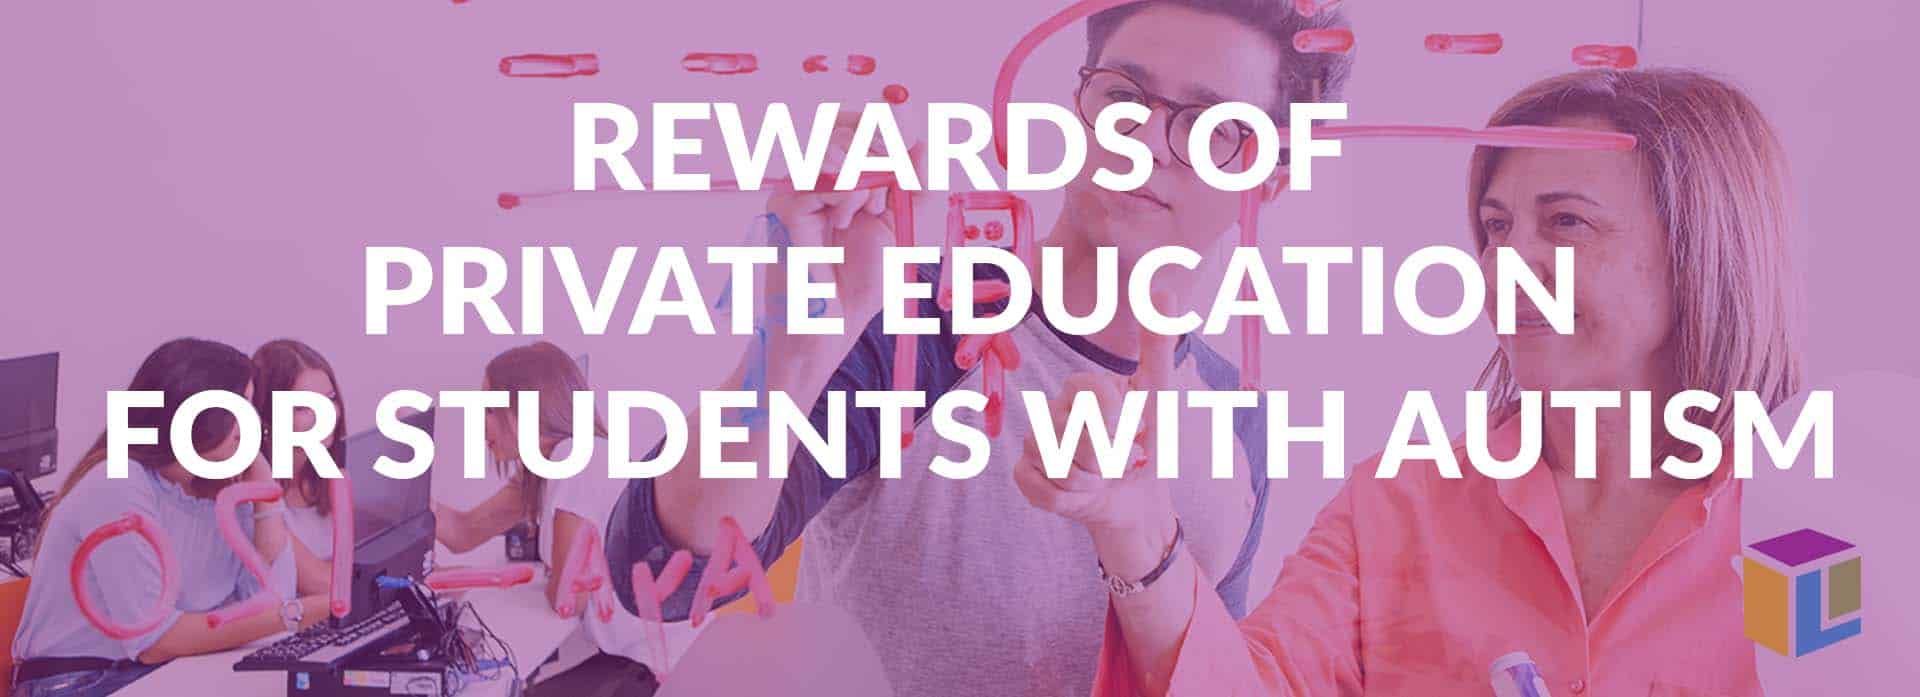 The Rewards Of Private Education For Students With Autism The Rewards Of Private Education For Students With Autism The Rewards Of Private Education For Students With Autism The Rewards Of Private Education For Students With Autism